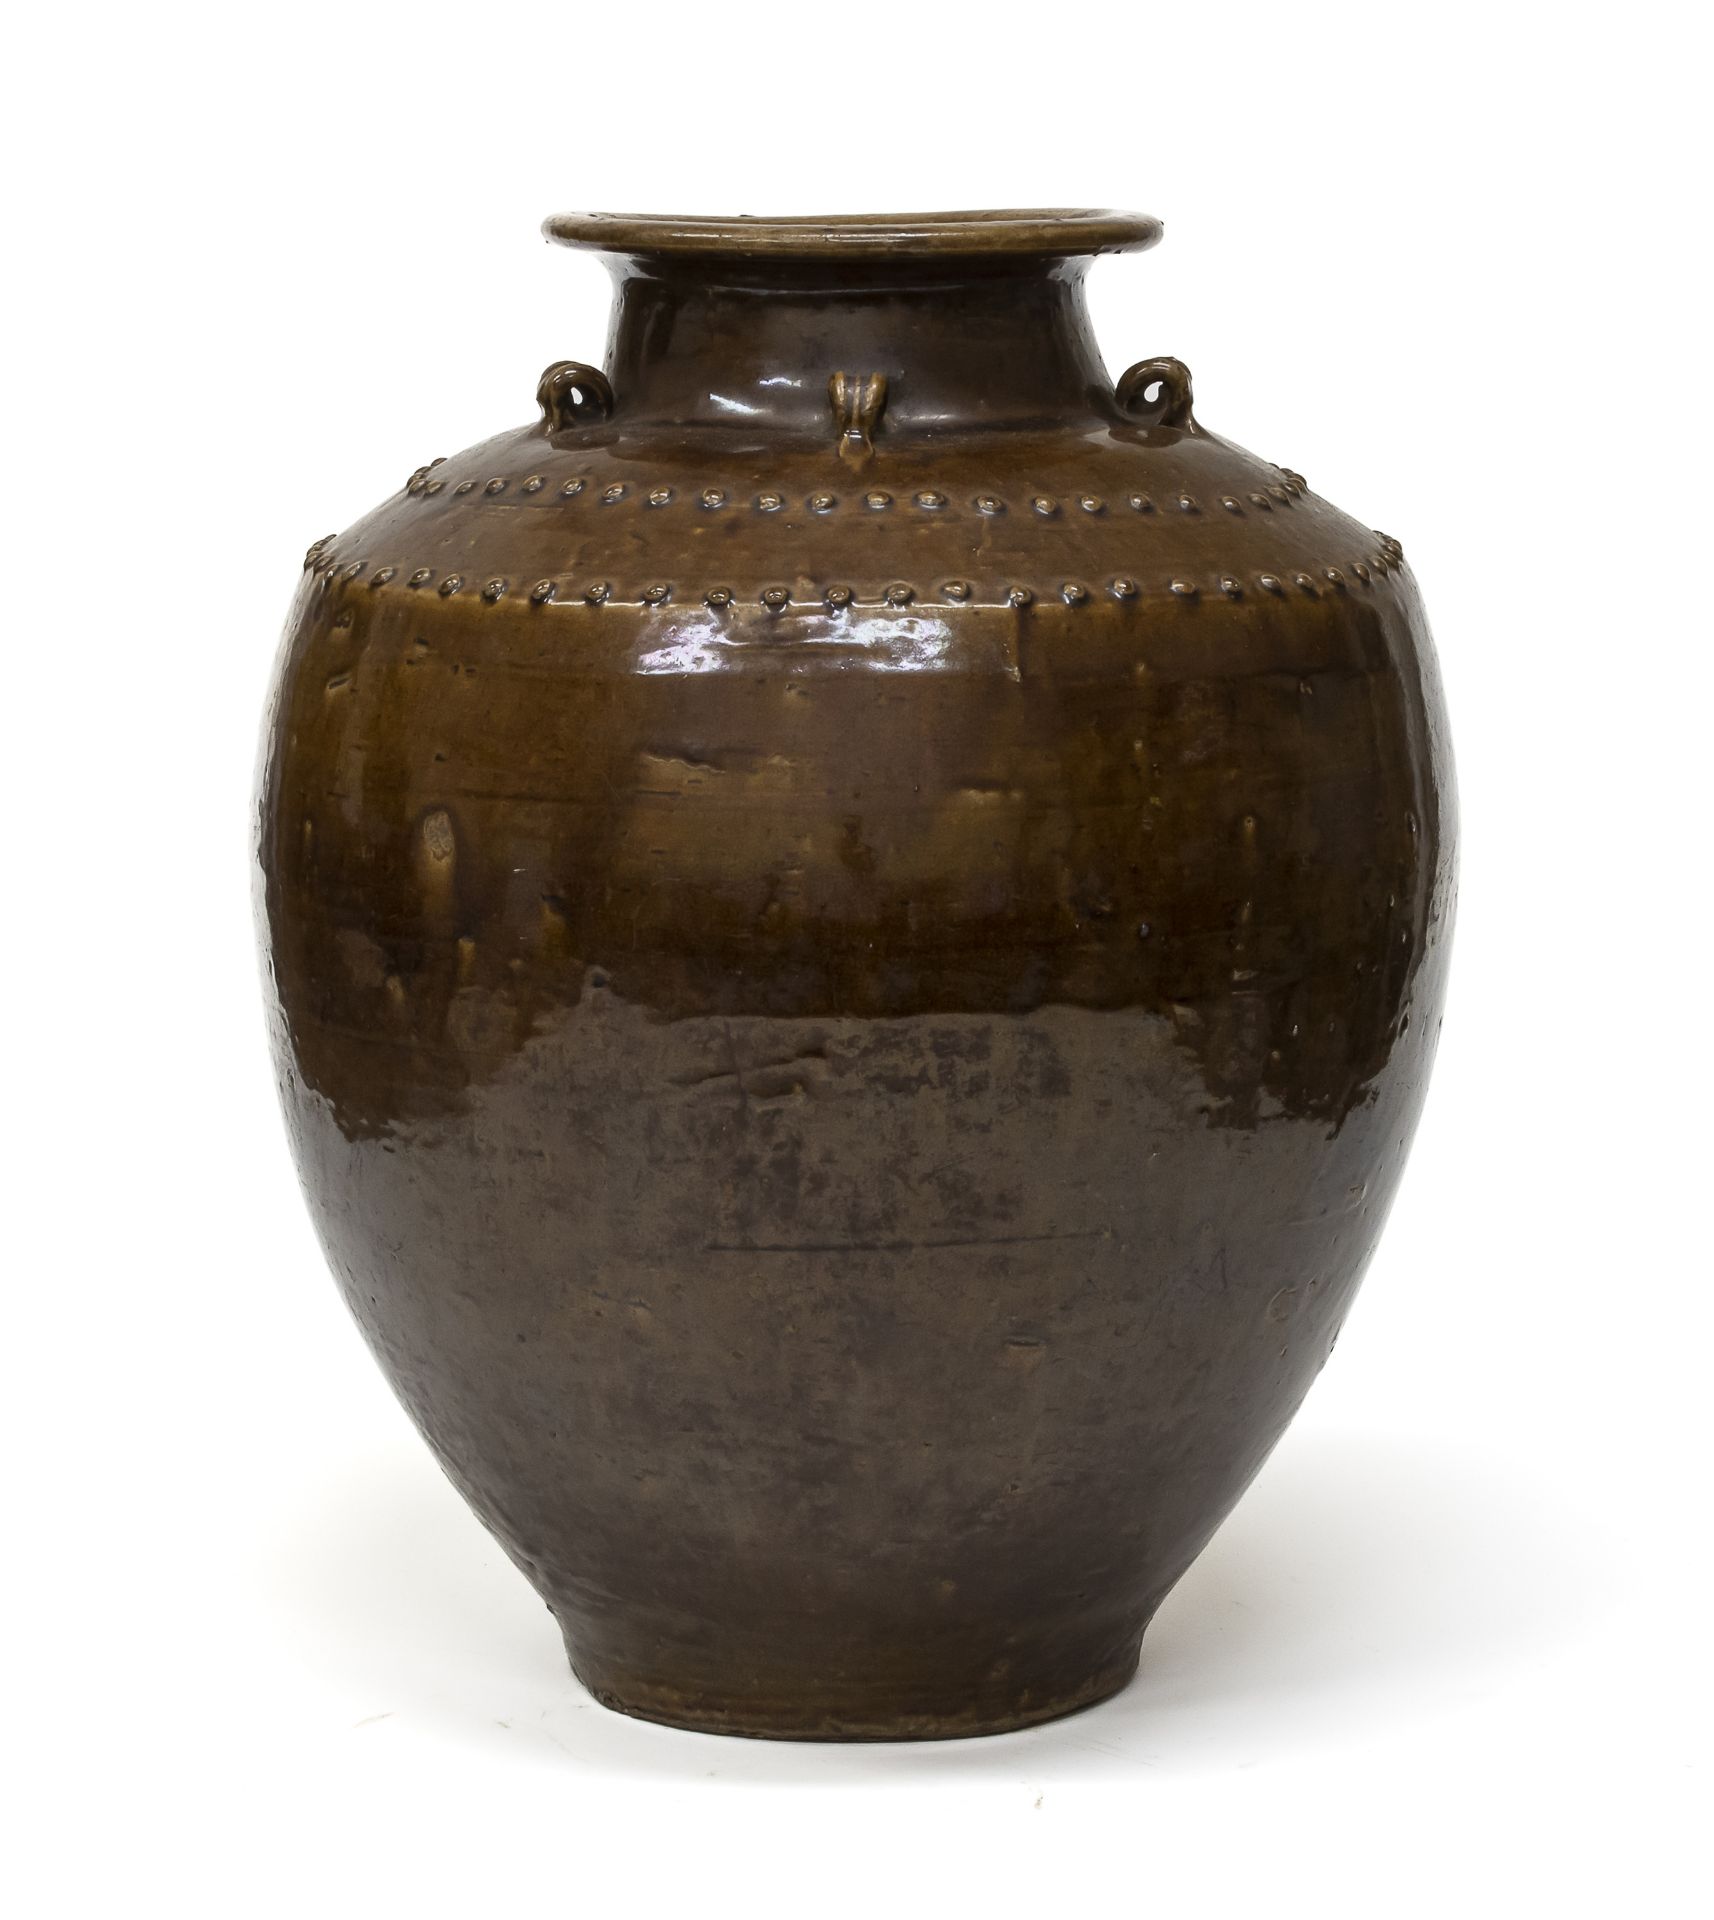 A CHINESE EARTHENWARE MARTABAN JAR. EARLY 20TH CENTURY.